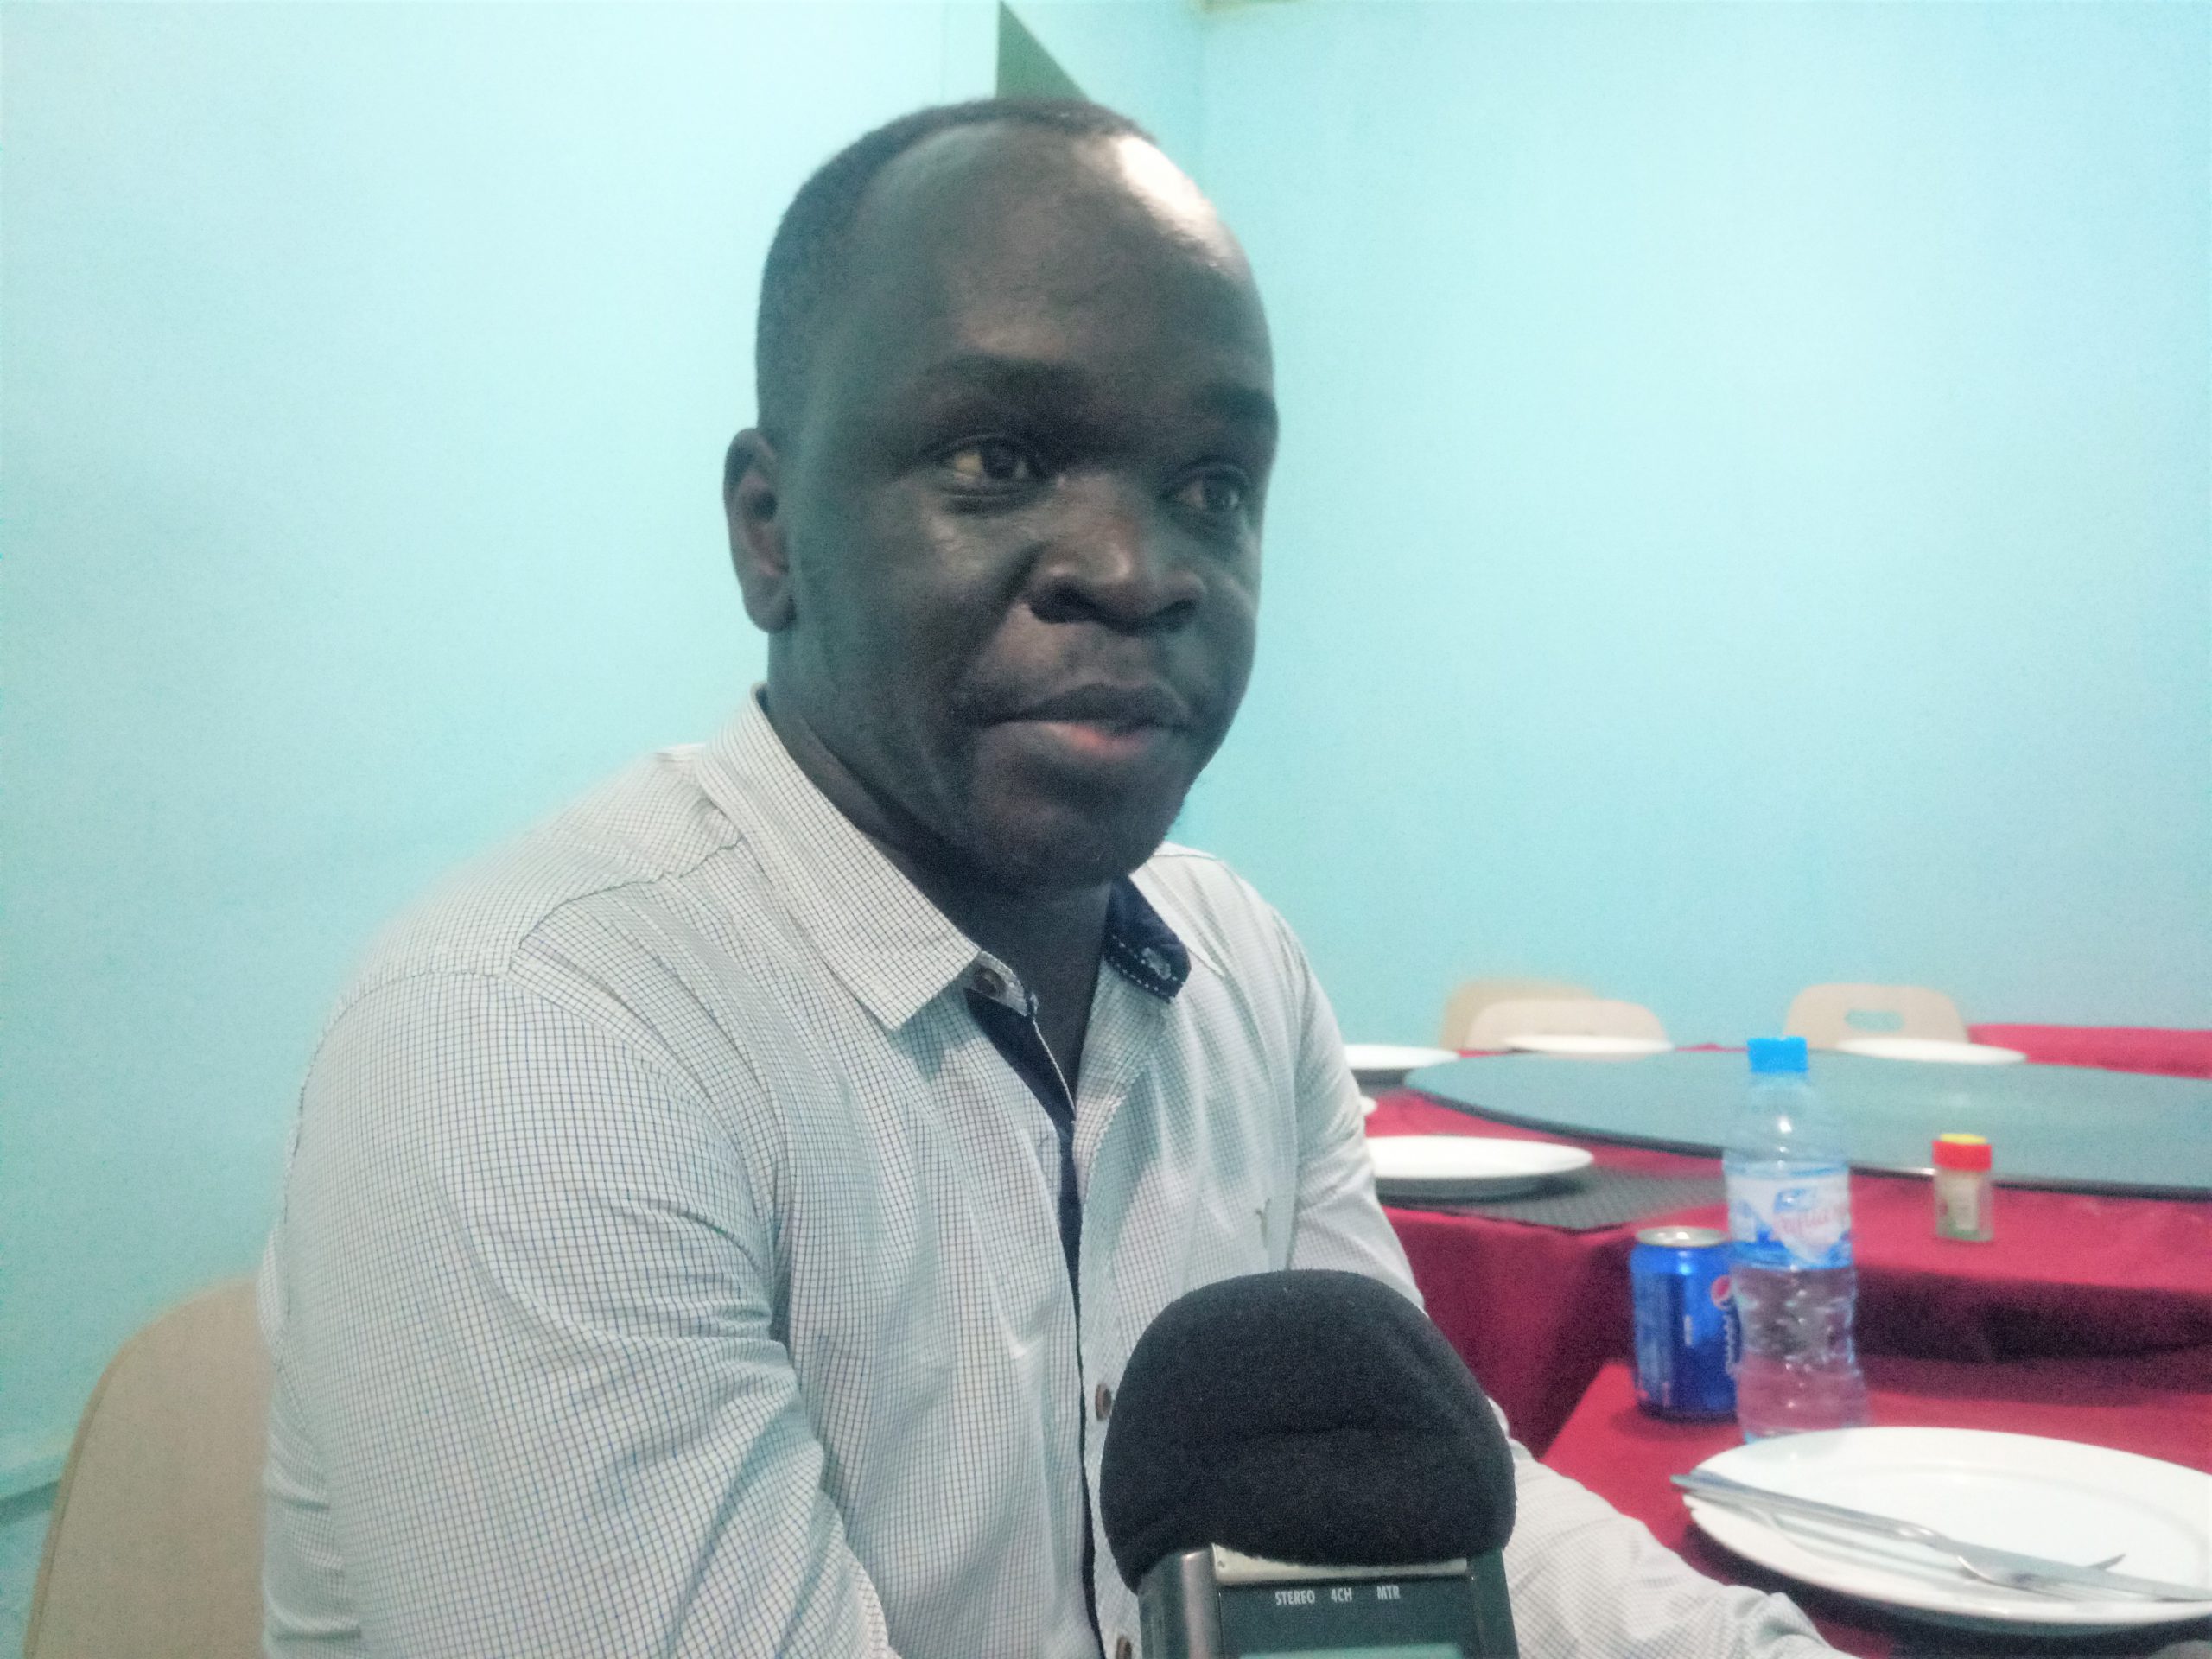 S. Sudanese doctors to offer free medical treatment, surgery in Wau